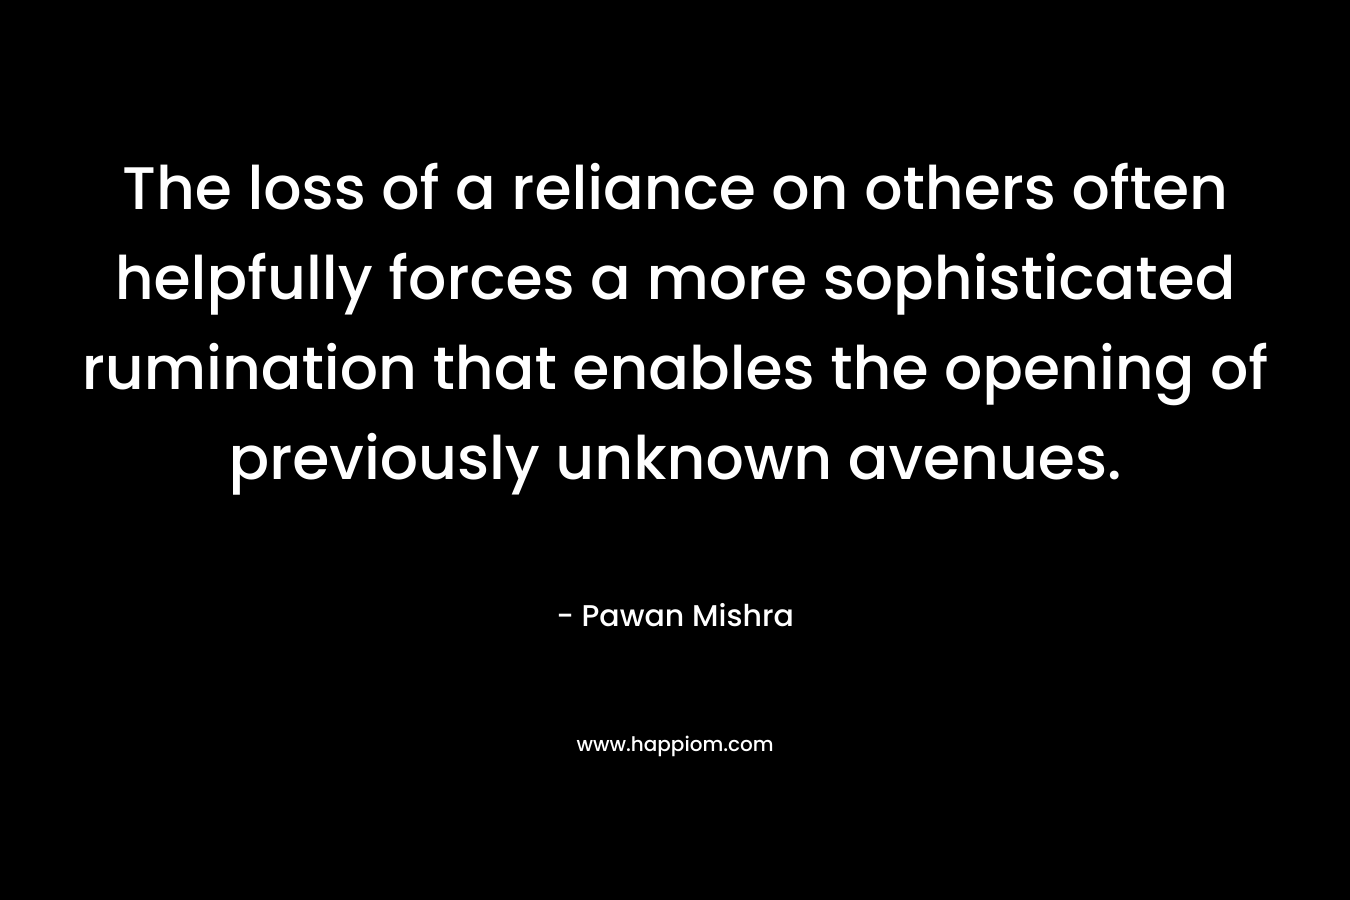 The loss of a reliance on others often helpfully forces a more sophisticated rumination that enables the opening of previously unknown avenues. – Pawan Mishra